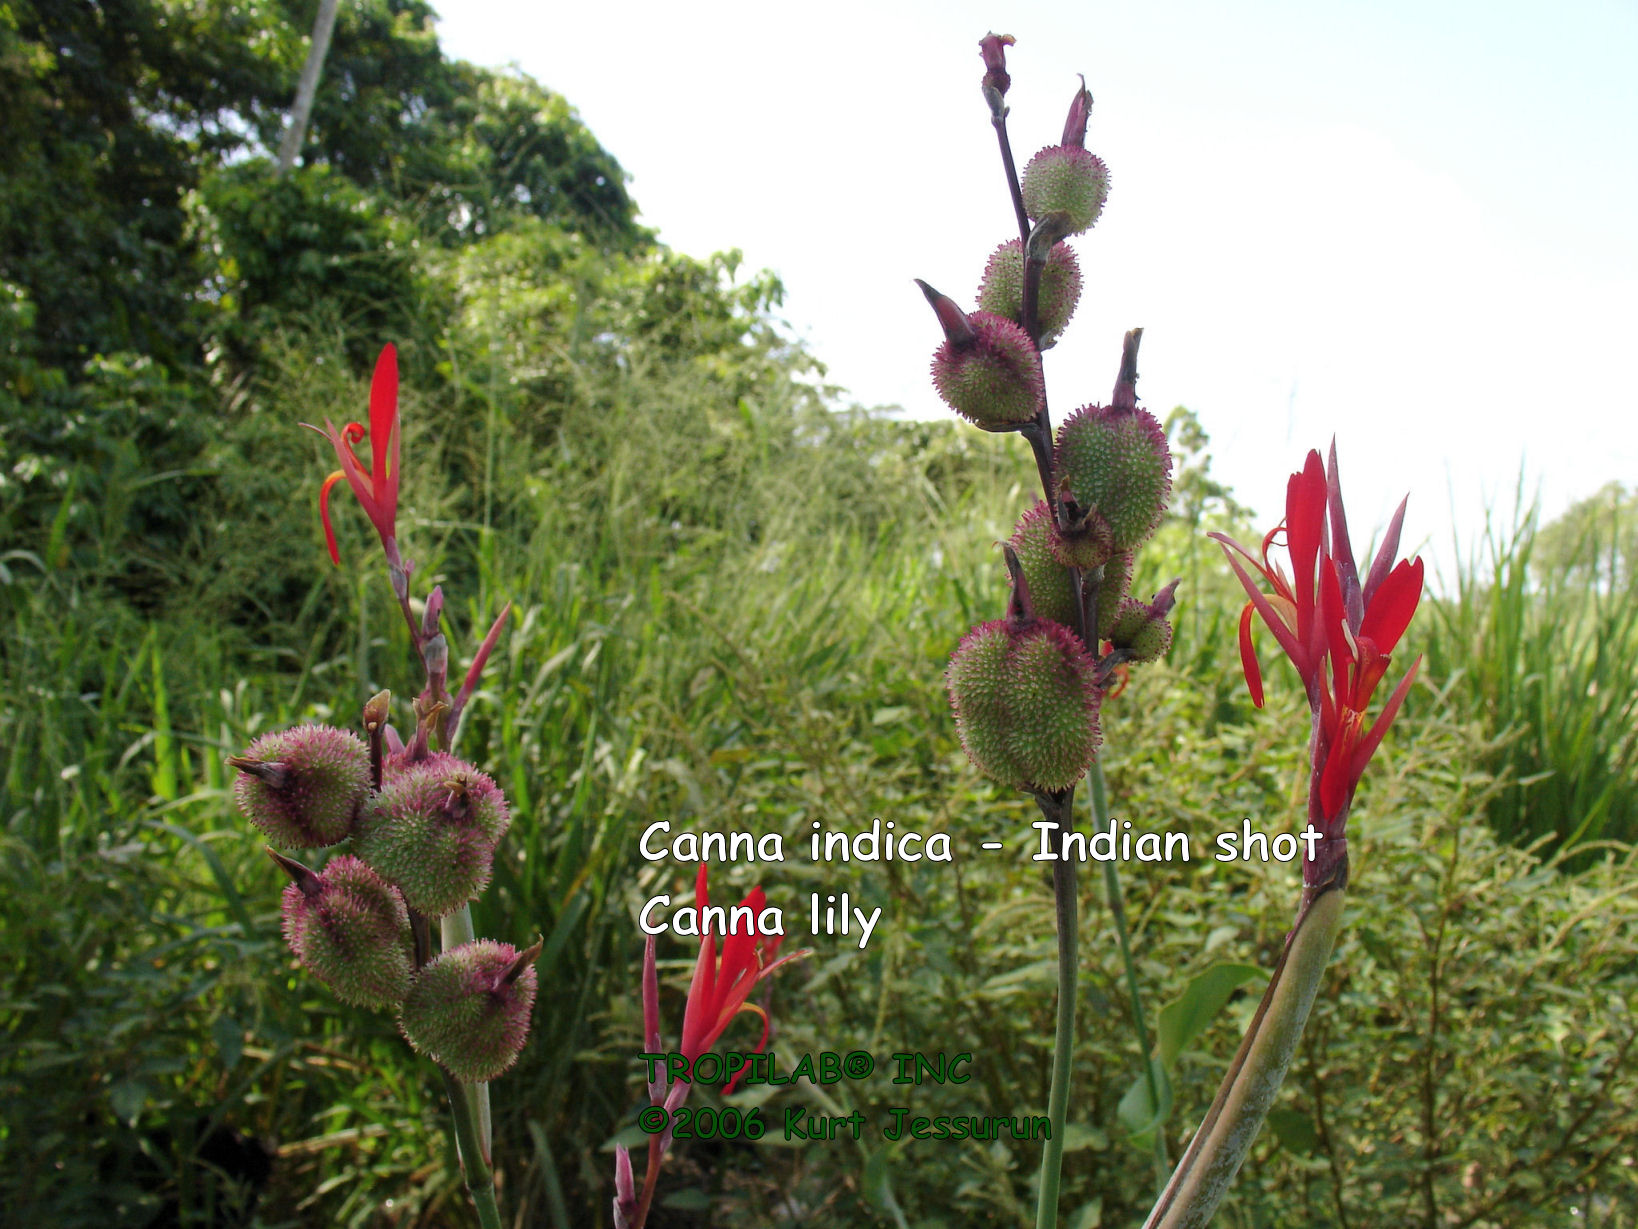 Red Canna indica - Indian shot